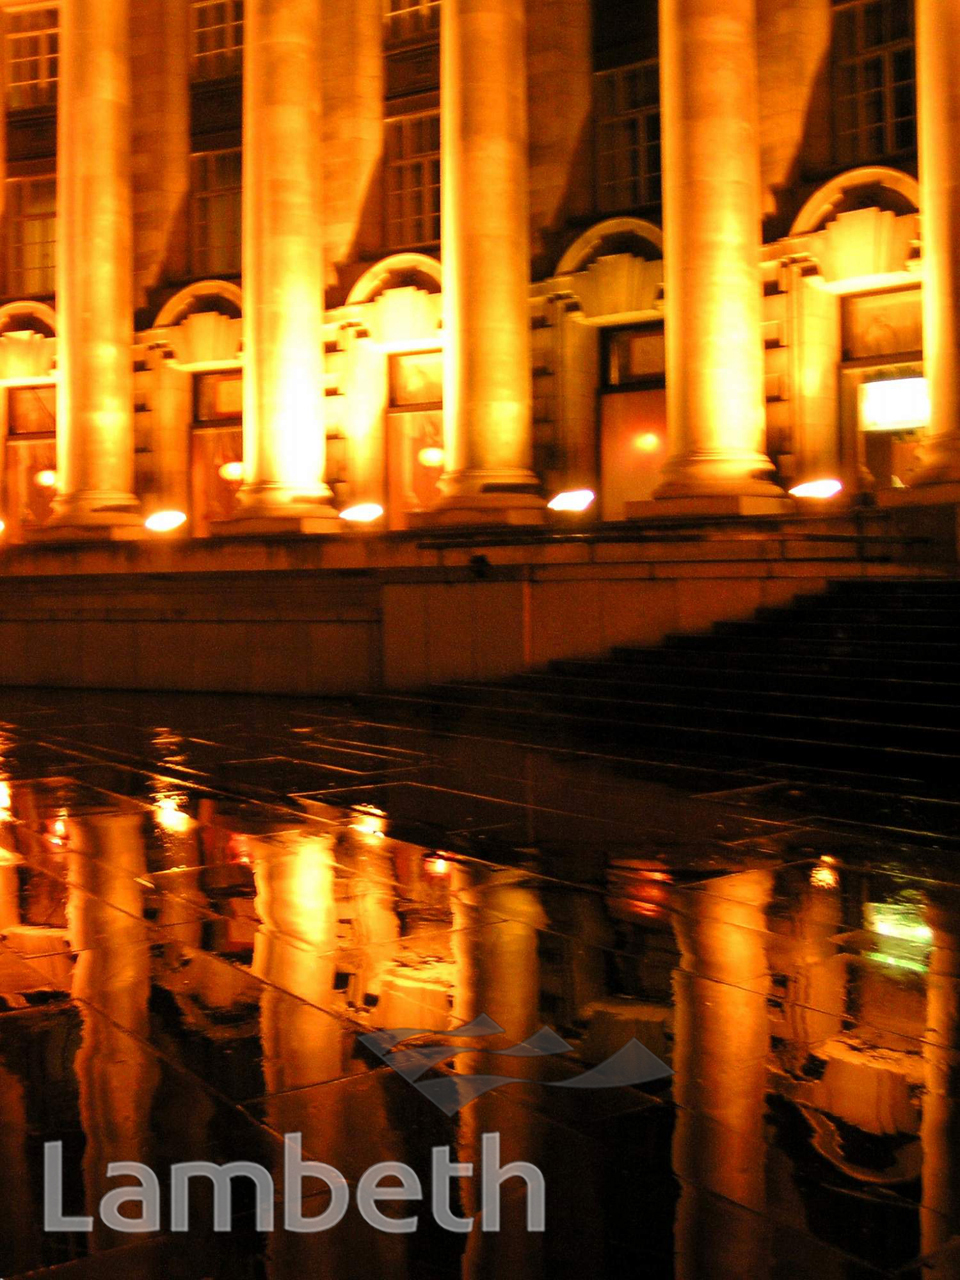 NIGHT-TIME REFLECTIONS, COUNTY HALL, WATERLOO